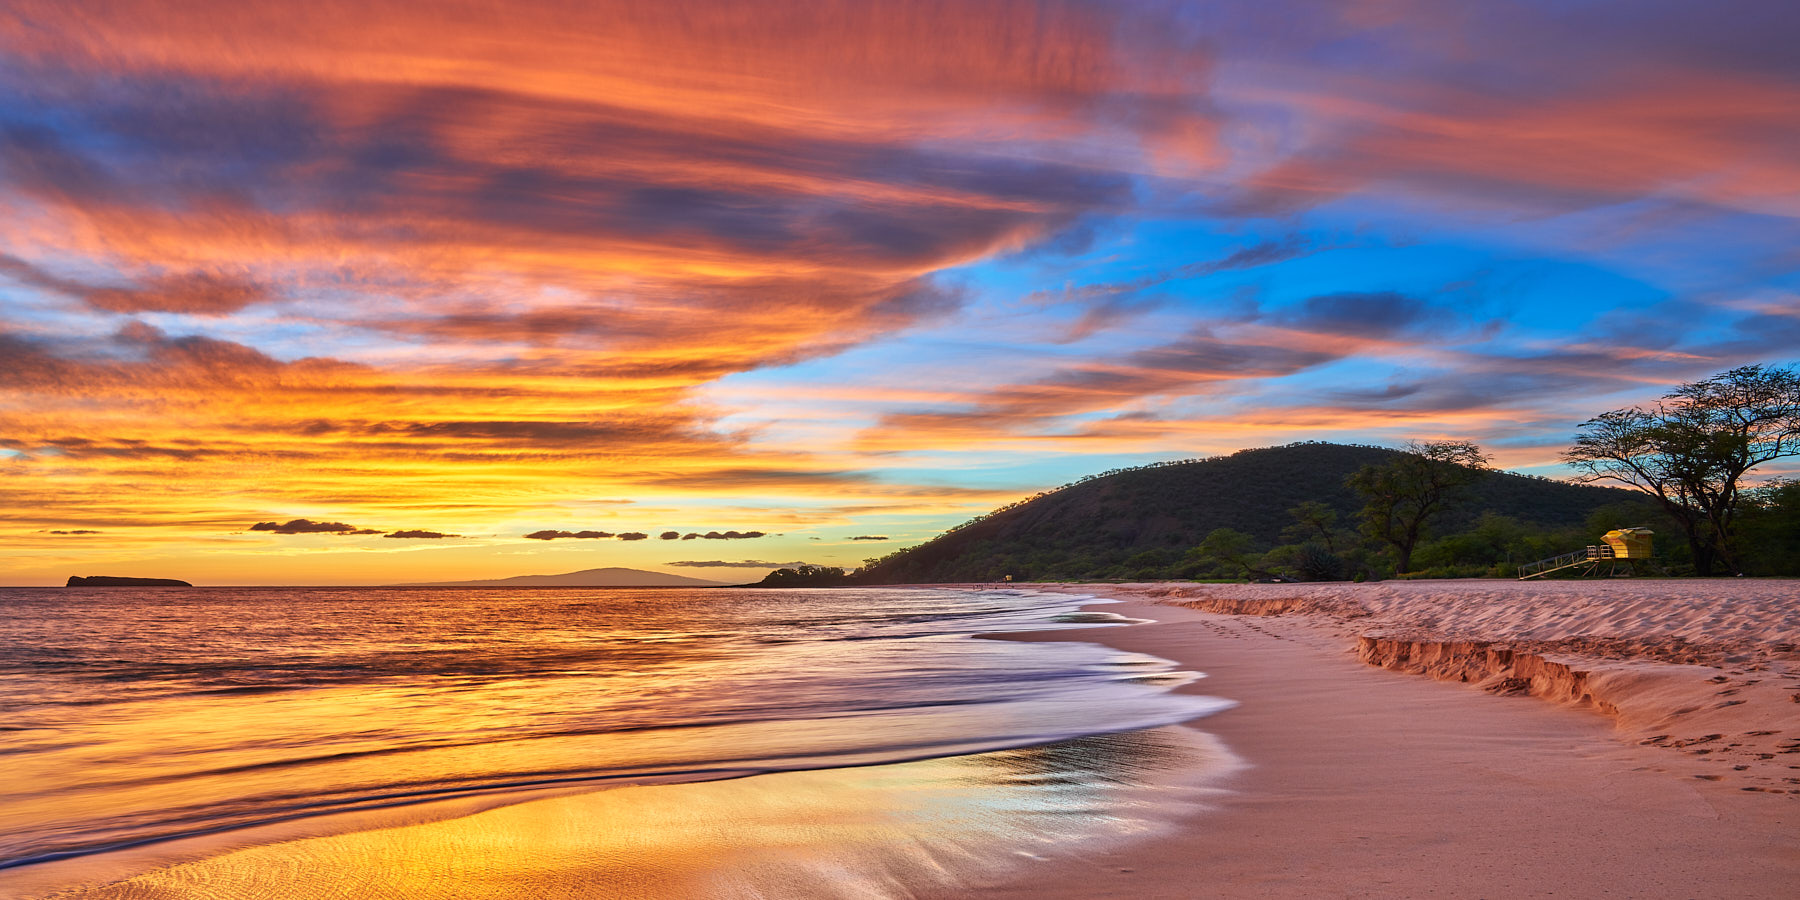 A glorious sunset erupts for this panoramic view of Big Beach (Makena State Park). The sky resembles almost a mirror of the beach itself for this special image